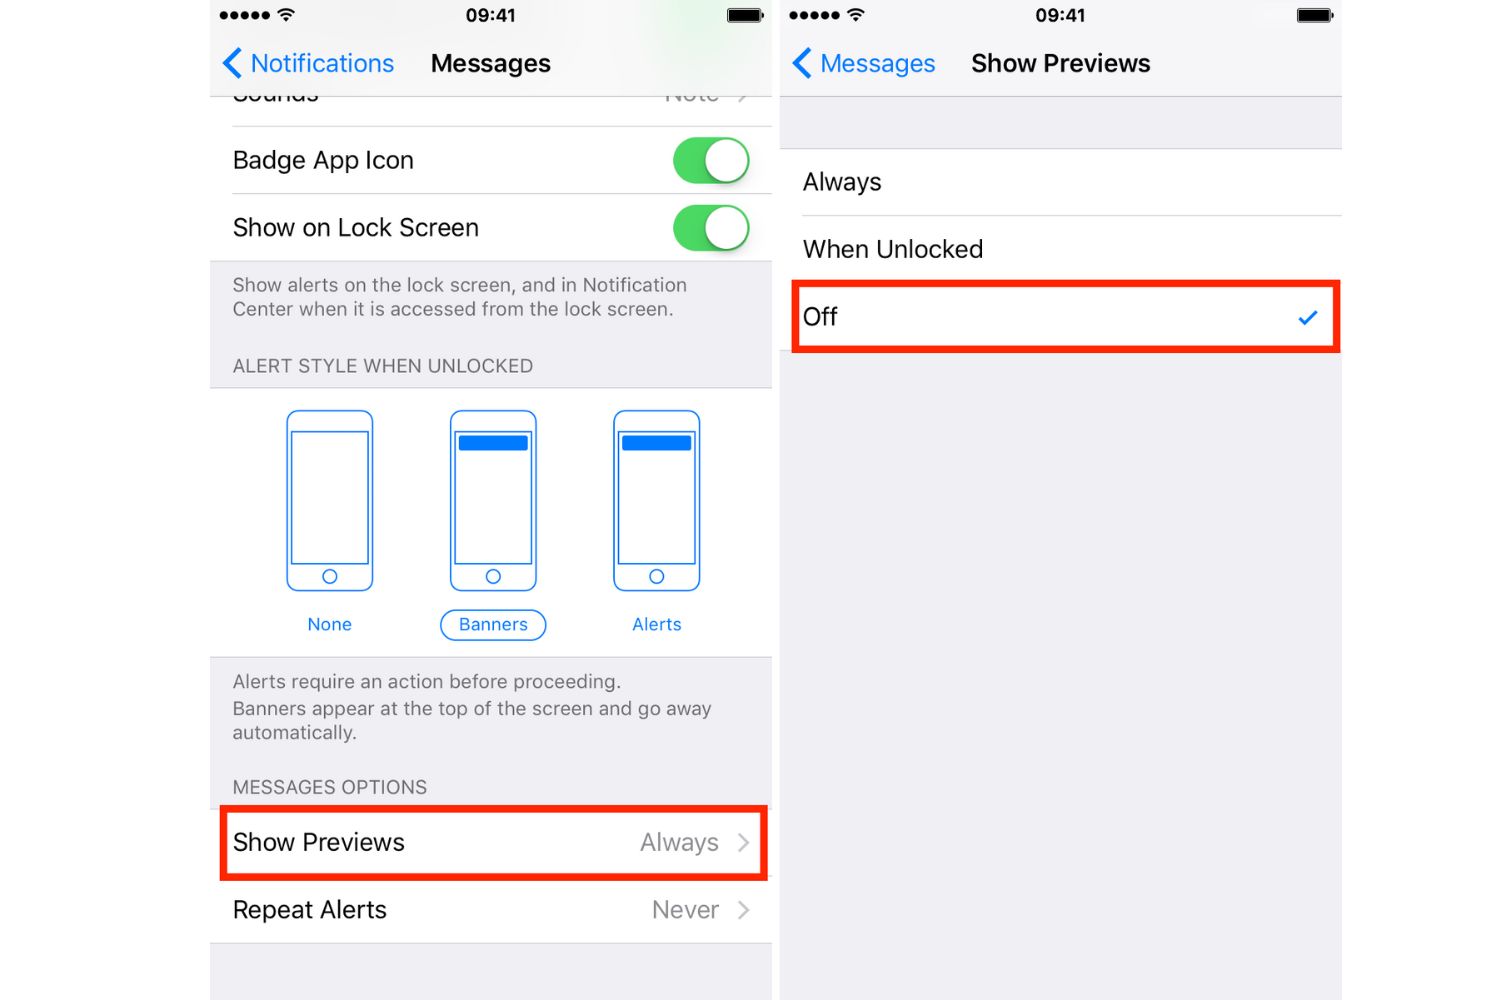 How To Hide Sender Name On IMessage Notification